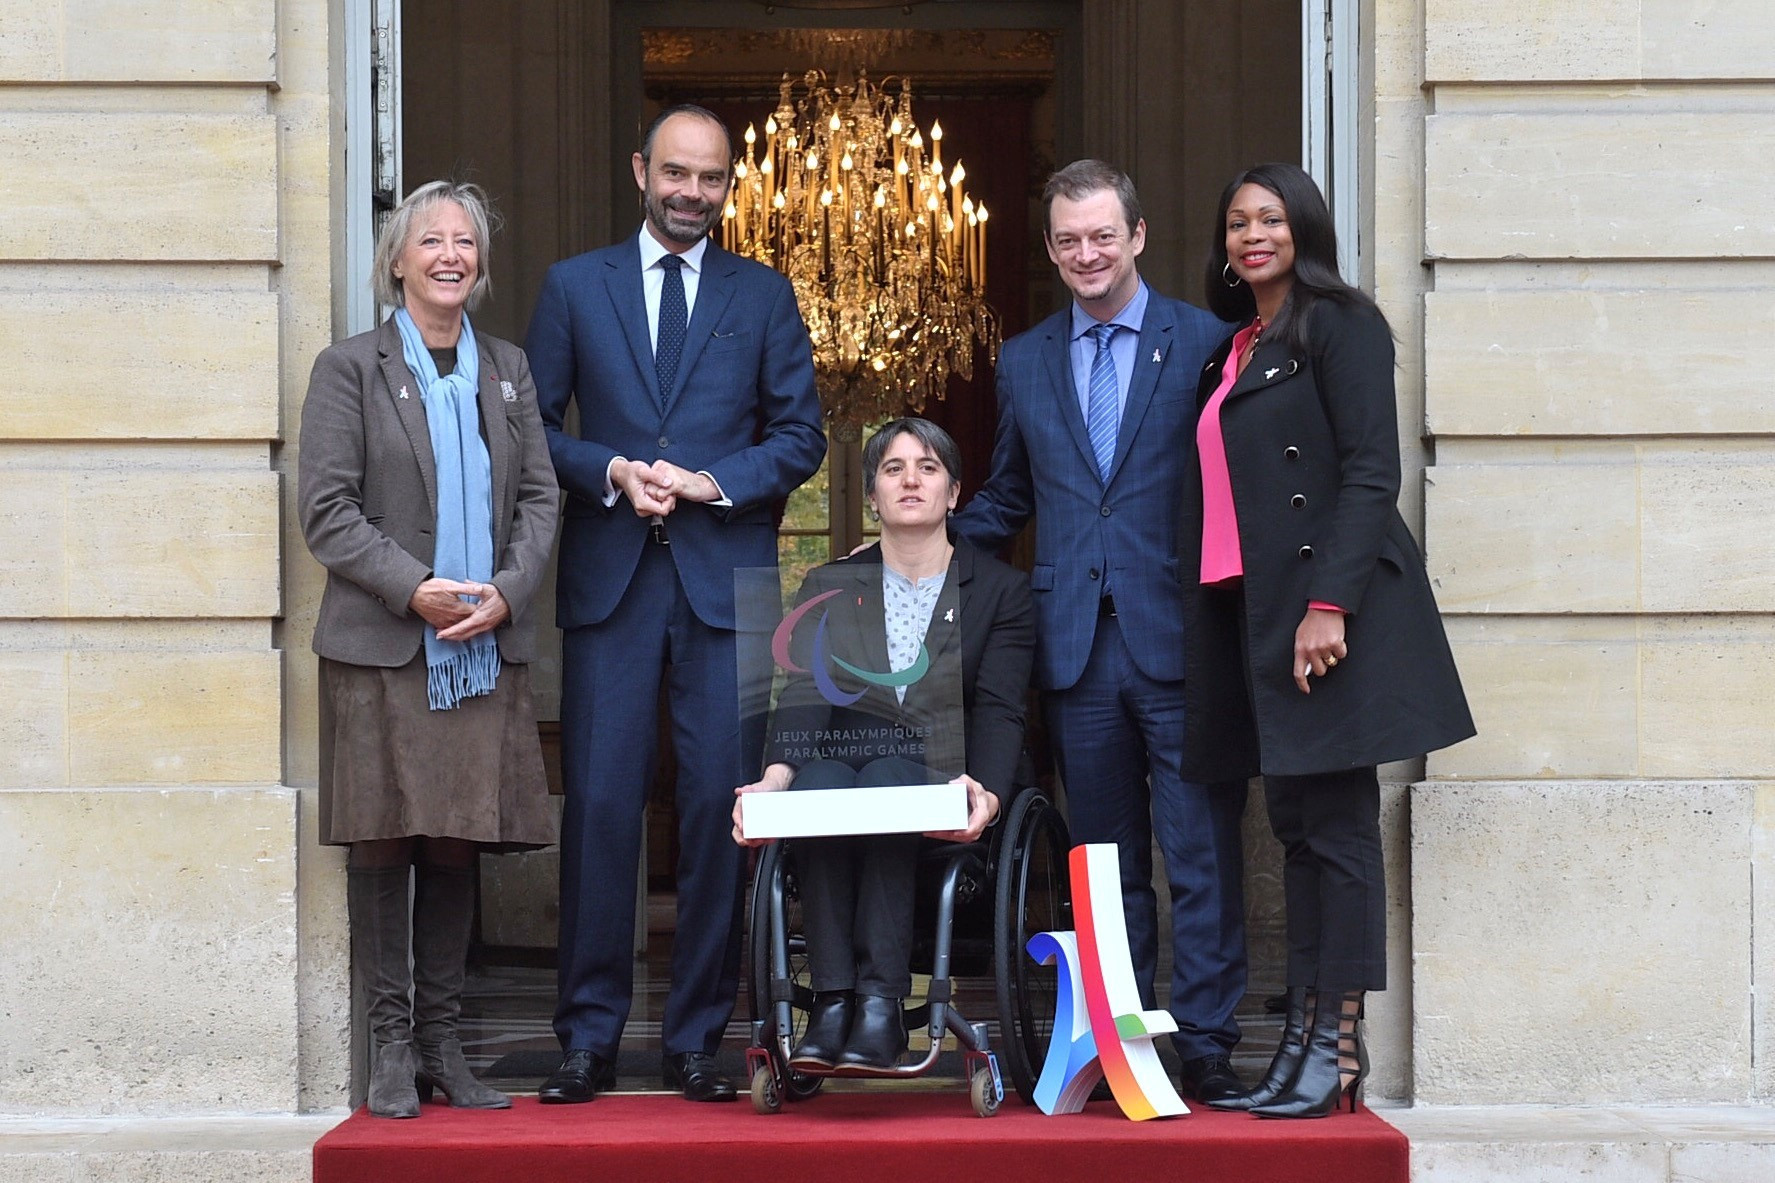 Paris 2024 already shaping up for fully integrated Paralympics, says IPC President